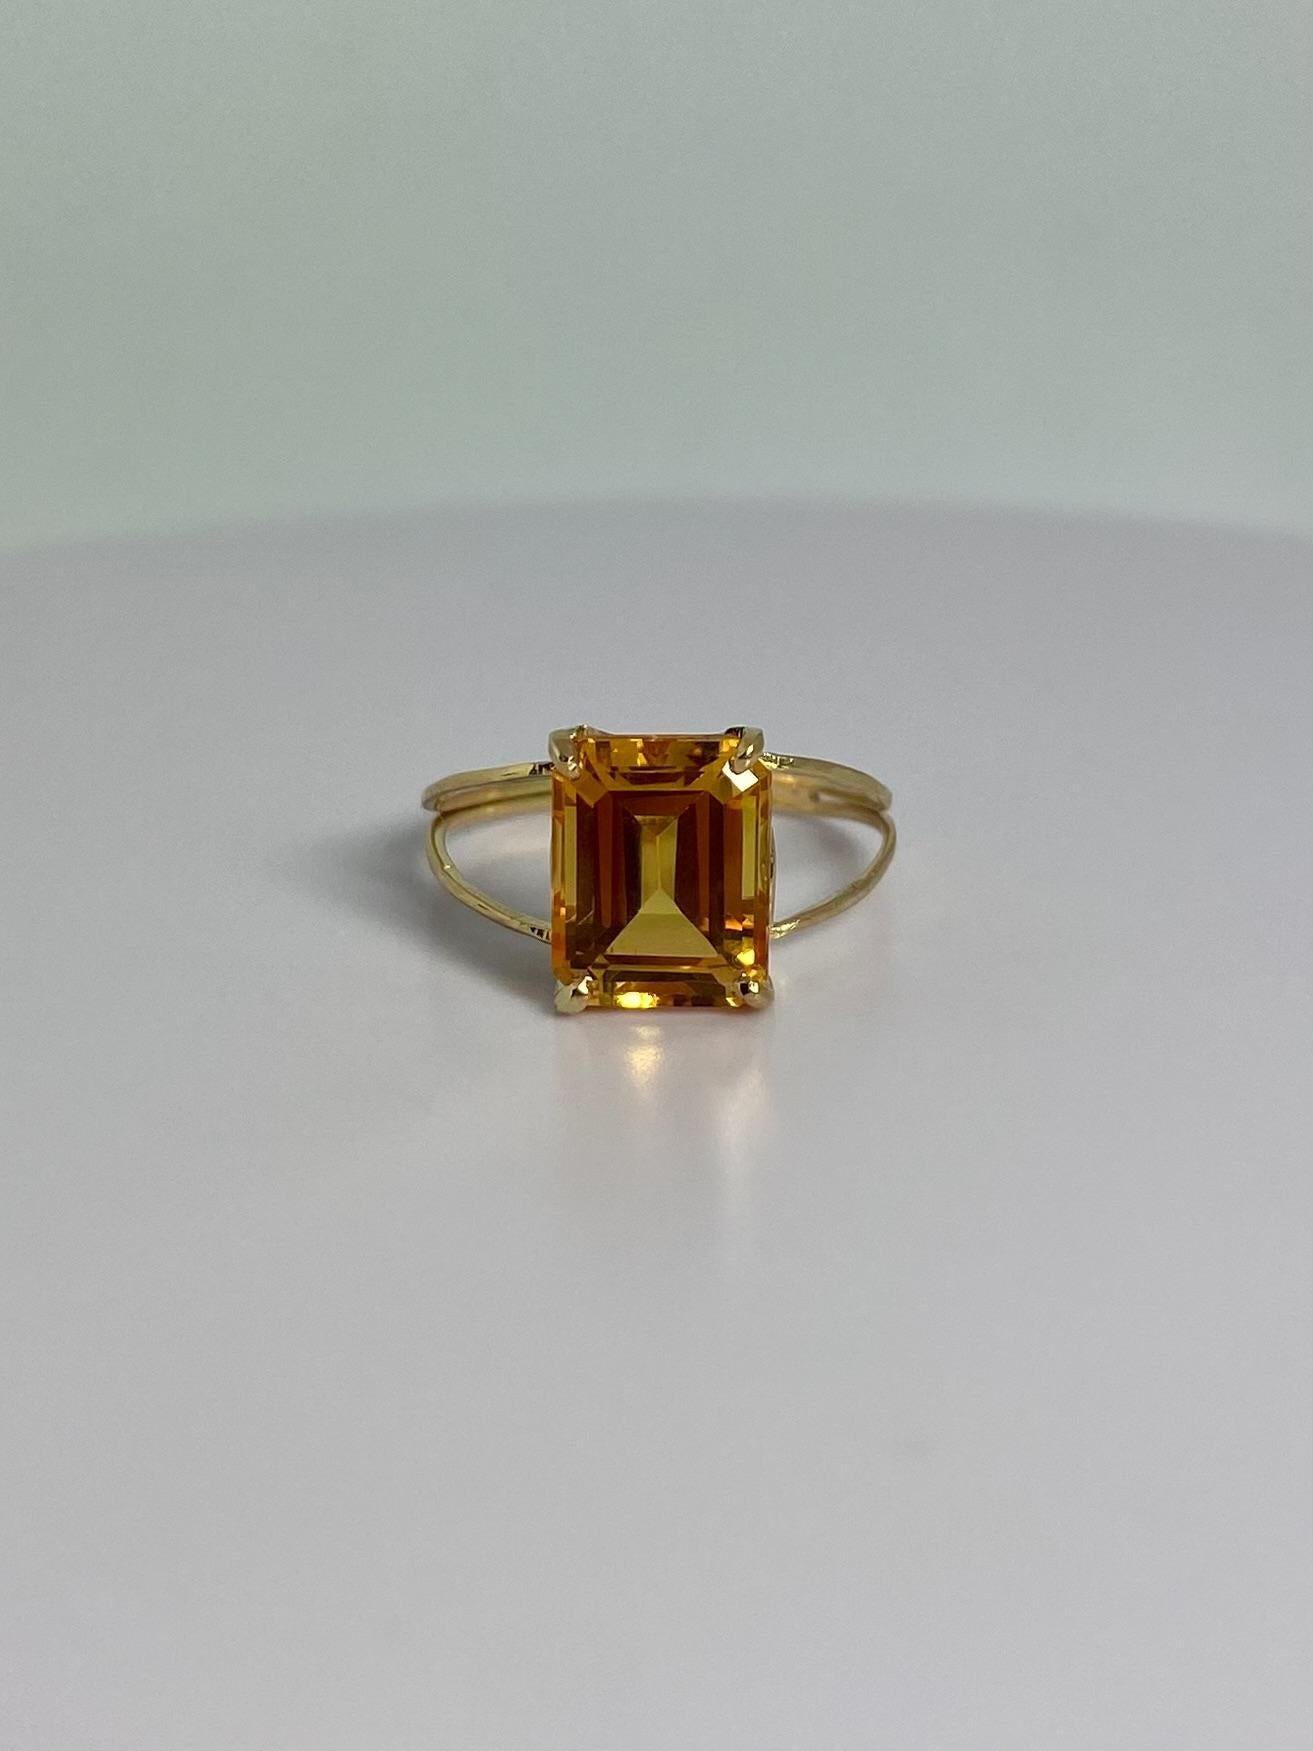 Pre-loved ring with beautiful emerald faceted citrine. The combination of the citrine and the setting of this vintage ring makes it an absolute stunning preloved jewel.  Refinement & elegance you will experience while wearing this jewel. This is